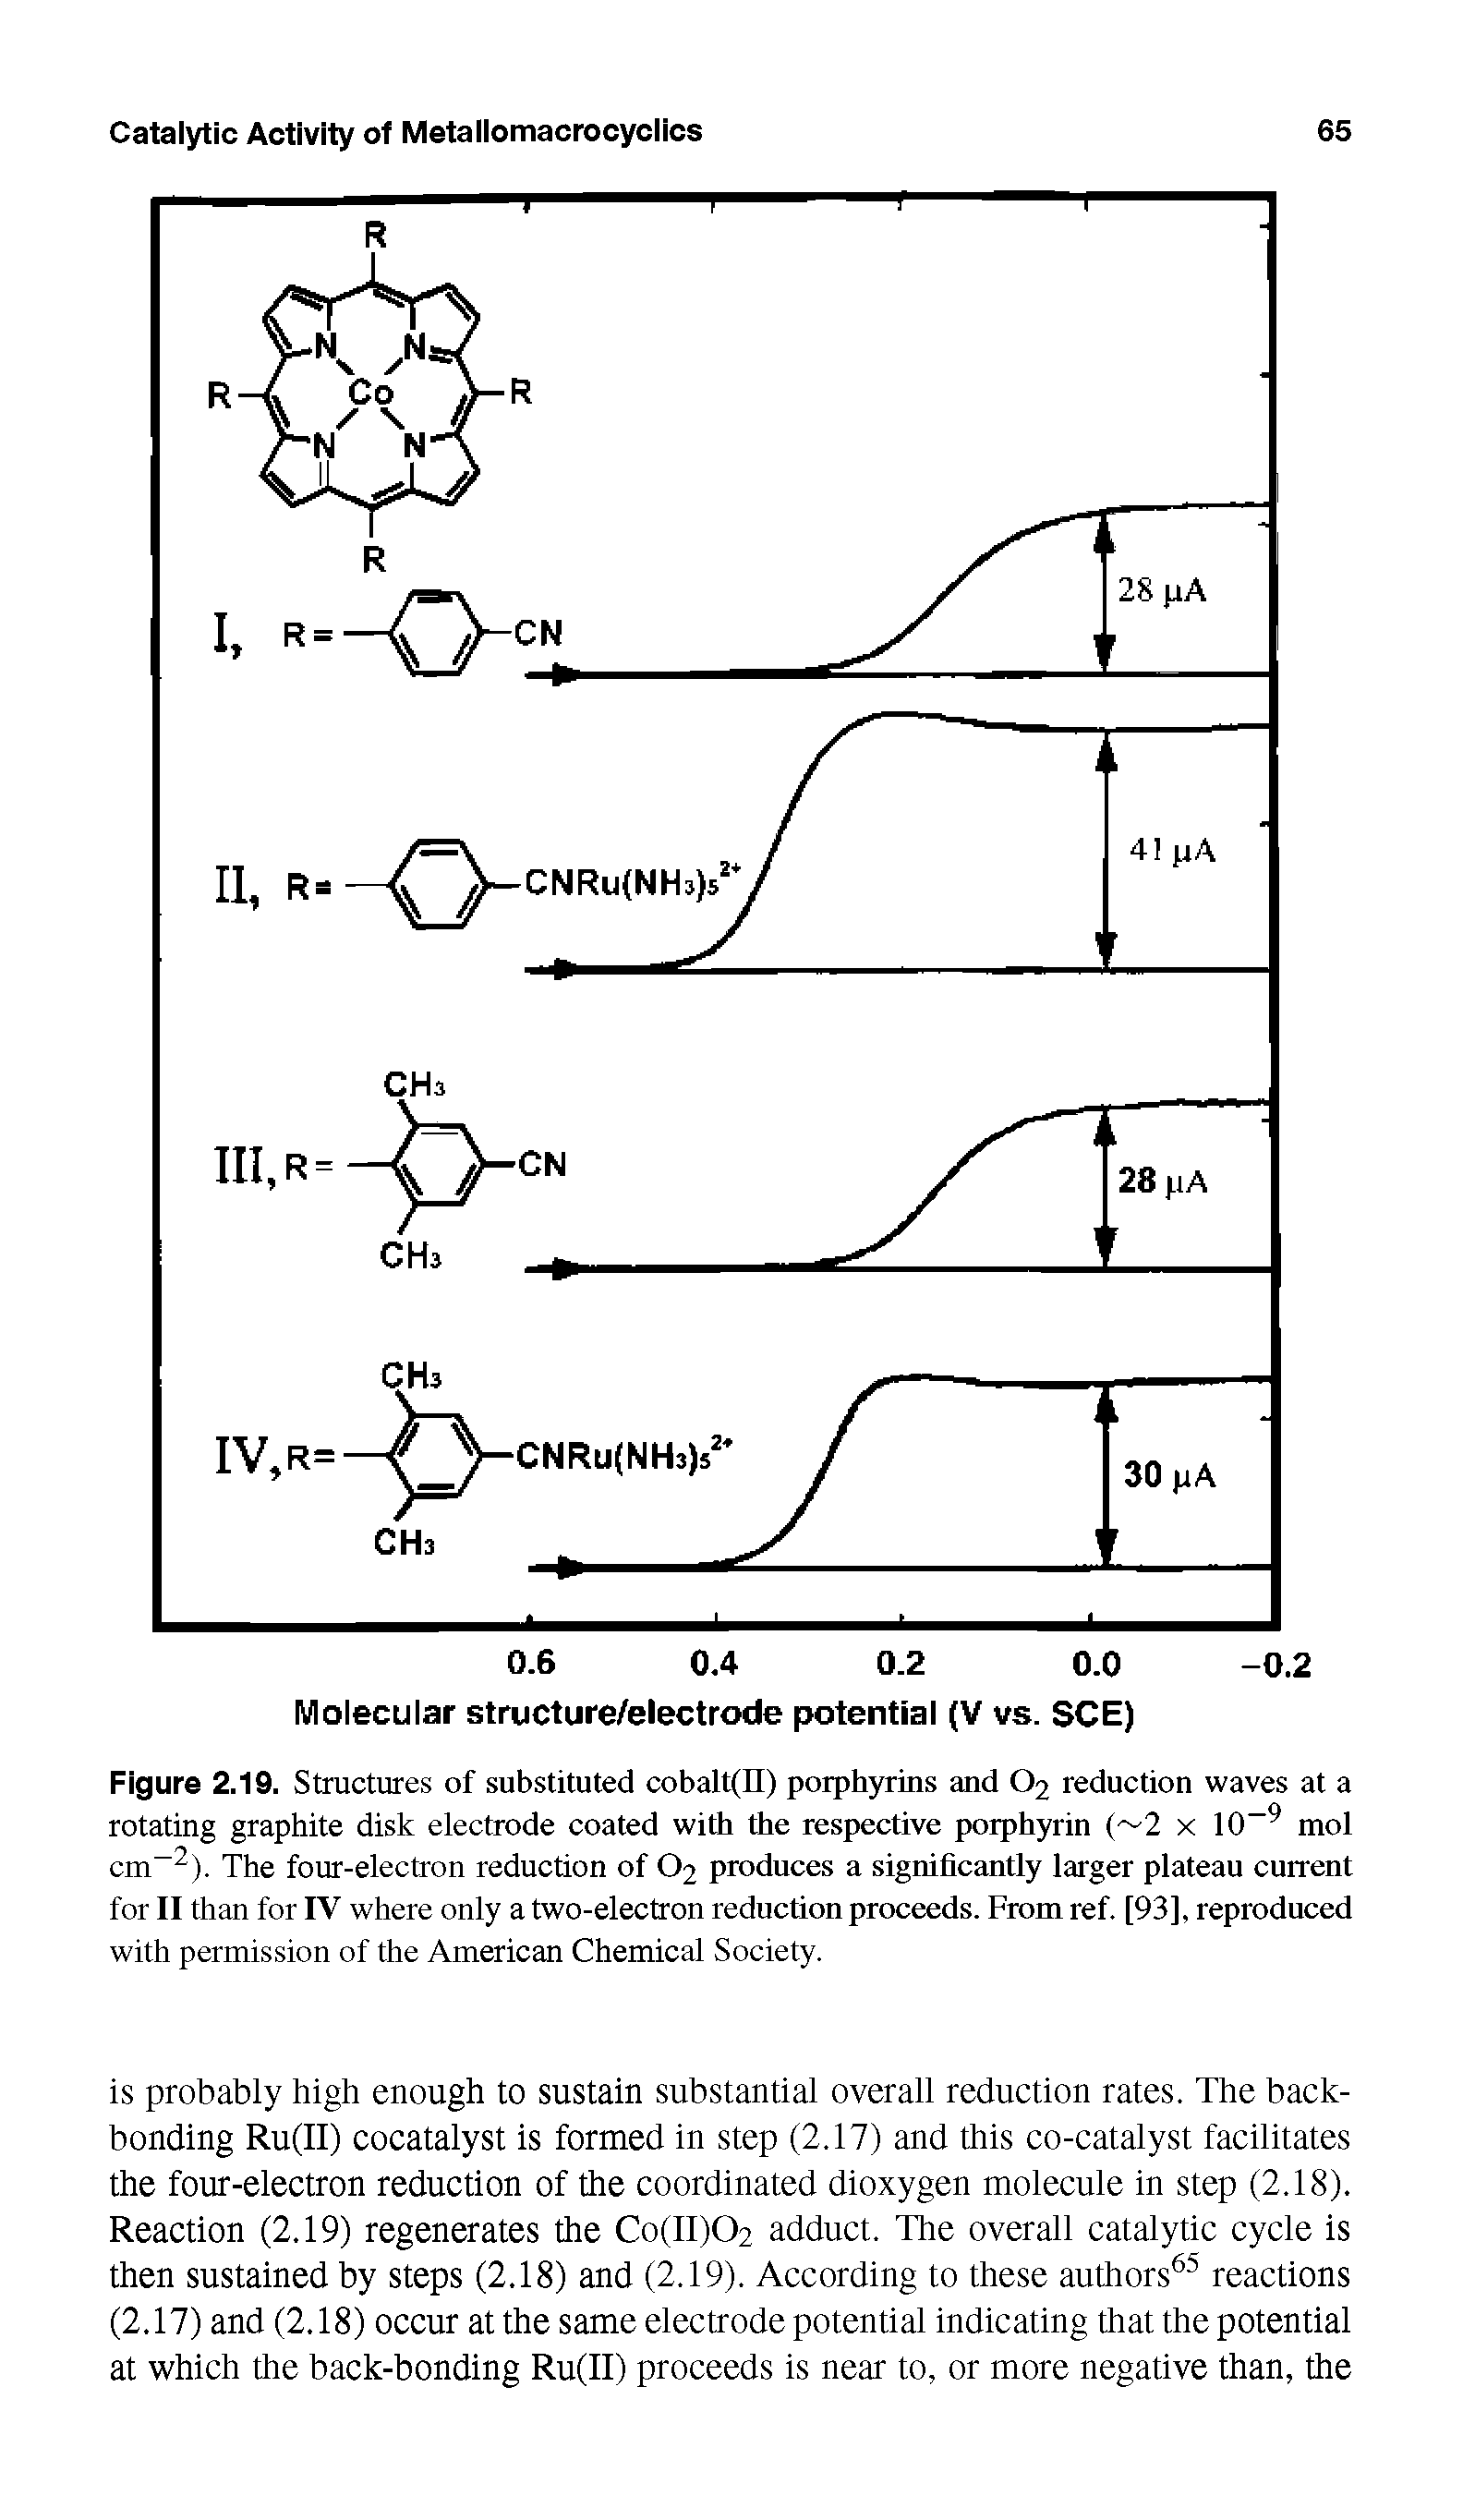 Figure 2.19. Structures of substituted cobalt(II) porphyrins and O2 reduction waves at a rotating graphite disk electrode coated with the respective porphyrin ( 2 x 10 mol cm ). The four-electron reduction of O2 produces a significantly larger plateau current for II than for IV where only a two-electron reduction proceeds. From ref. [93], reproduced with permission of the American Chemical Society.